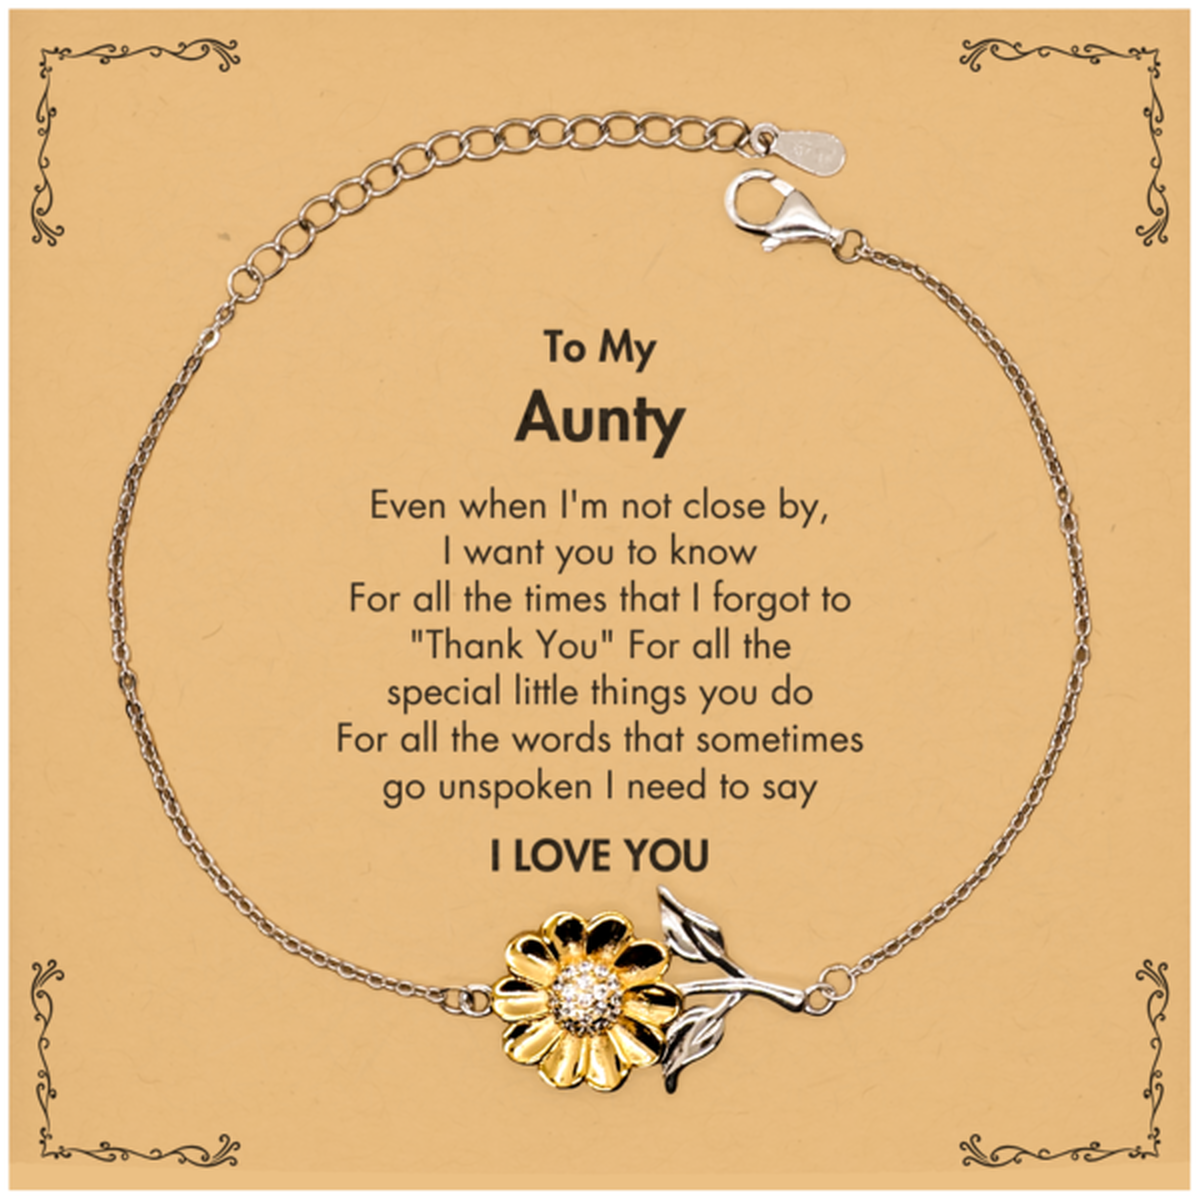 Thank You Gifts for Aunty, Keepsake Sunflower Bracelet Gifts for Aunty Birthday Mother's day Father's Day Aunty For all the words That sometimes go unspoken I need to say I LOVE YOU